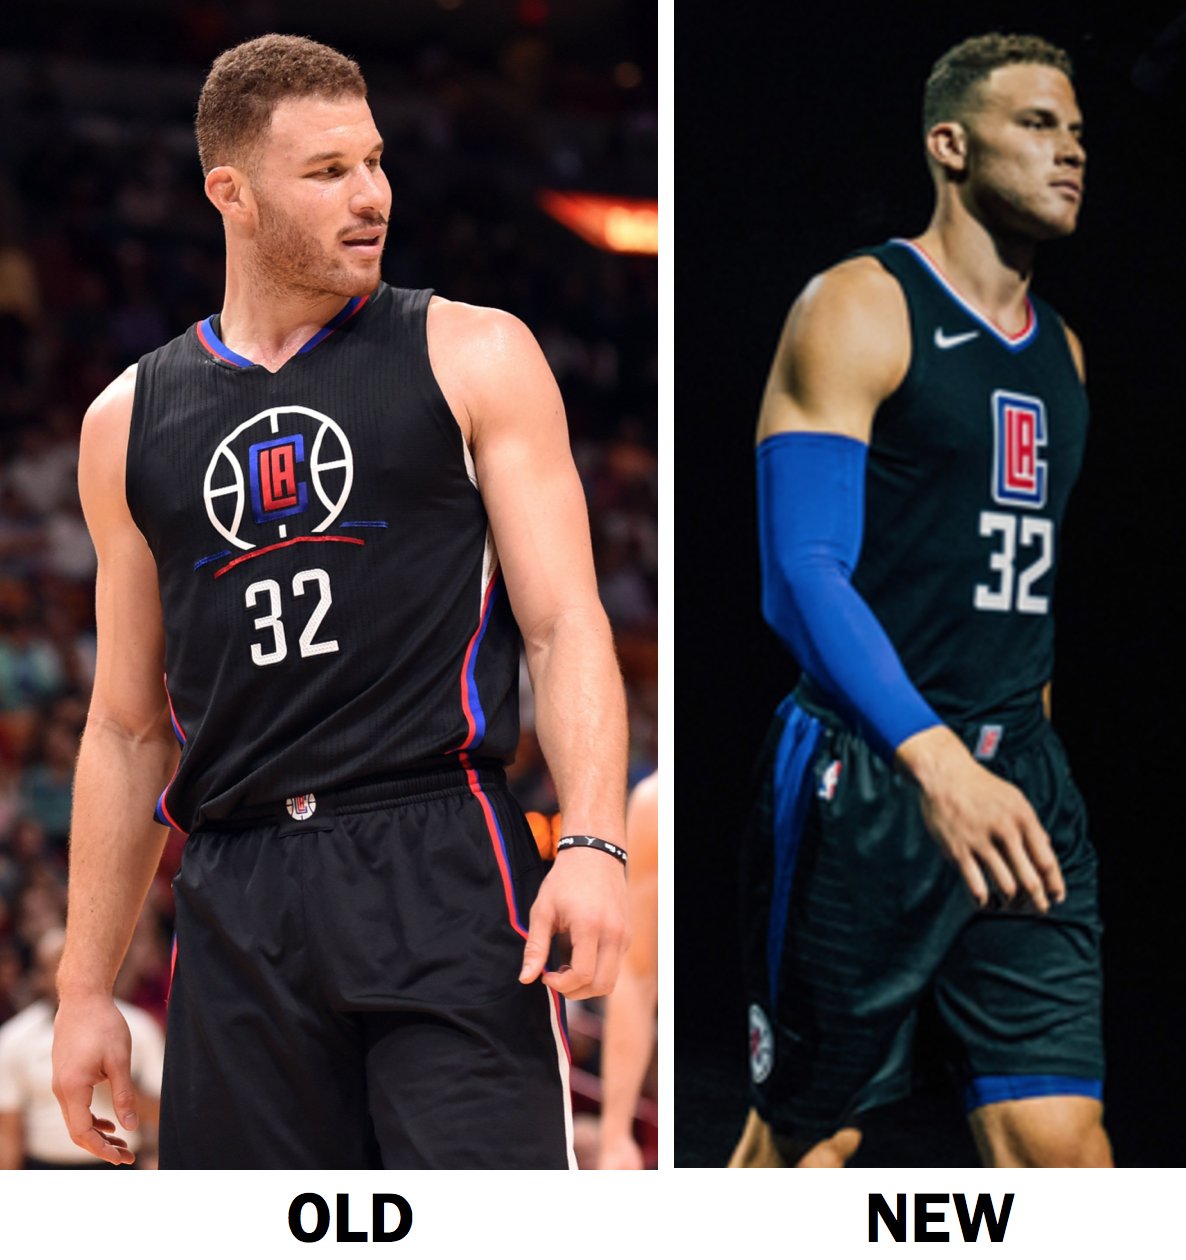 clippers alternate jersey